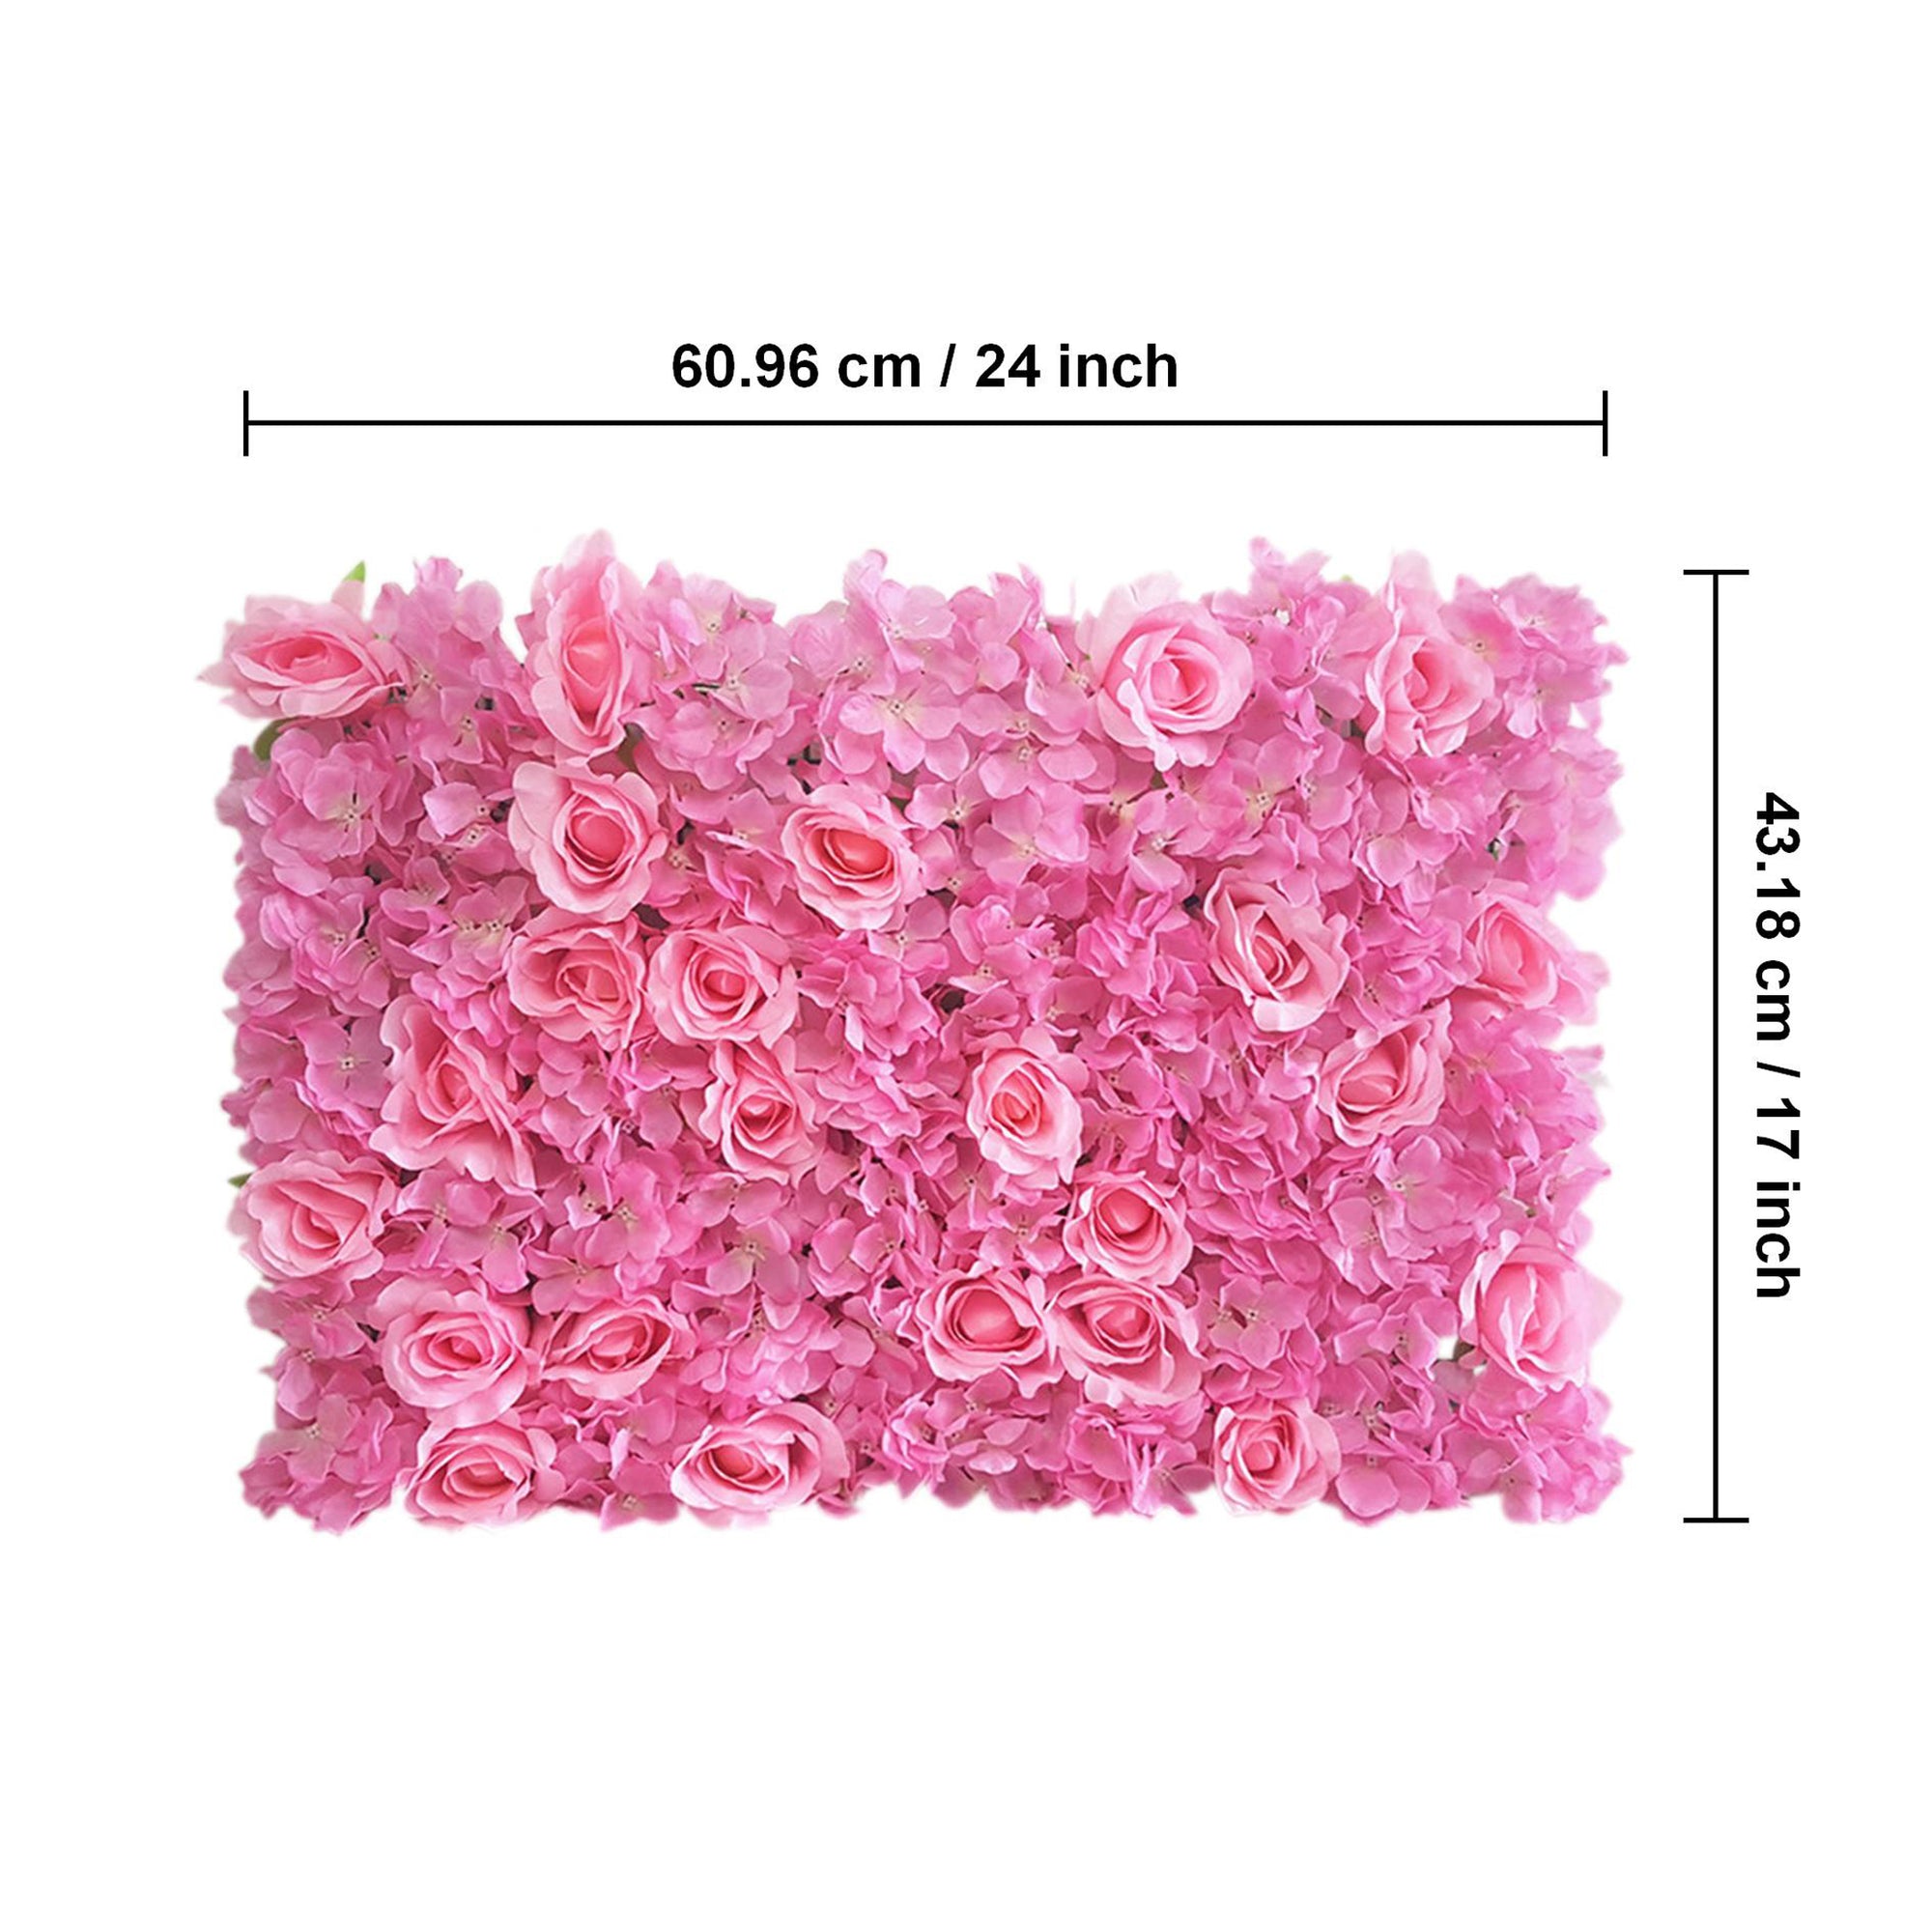 Atificial Flower Wall Pink Silk Rose Hydrangea Floral Heart Table Background